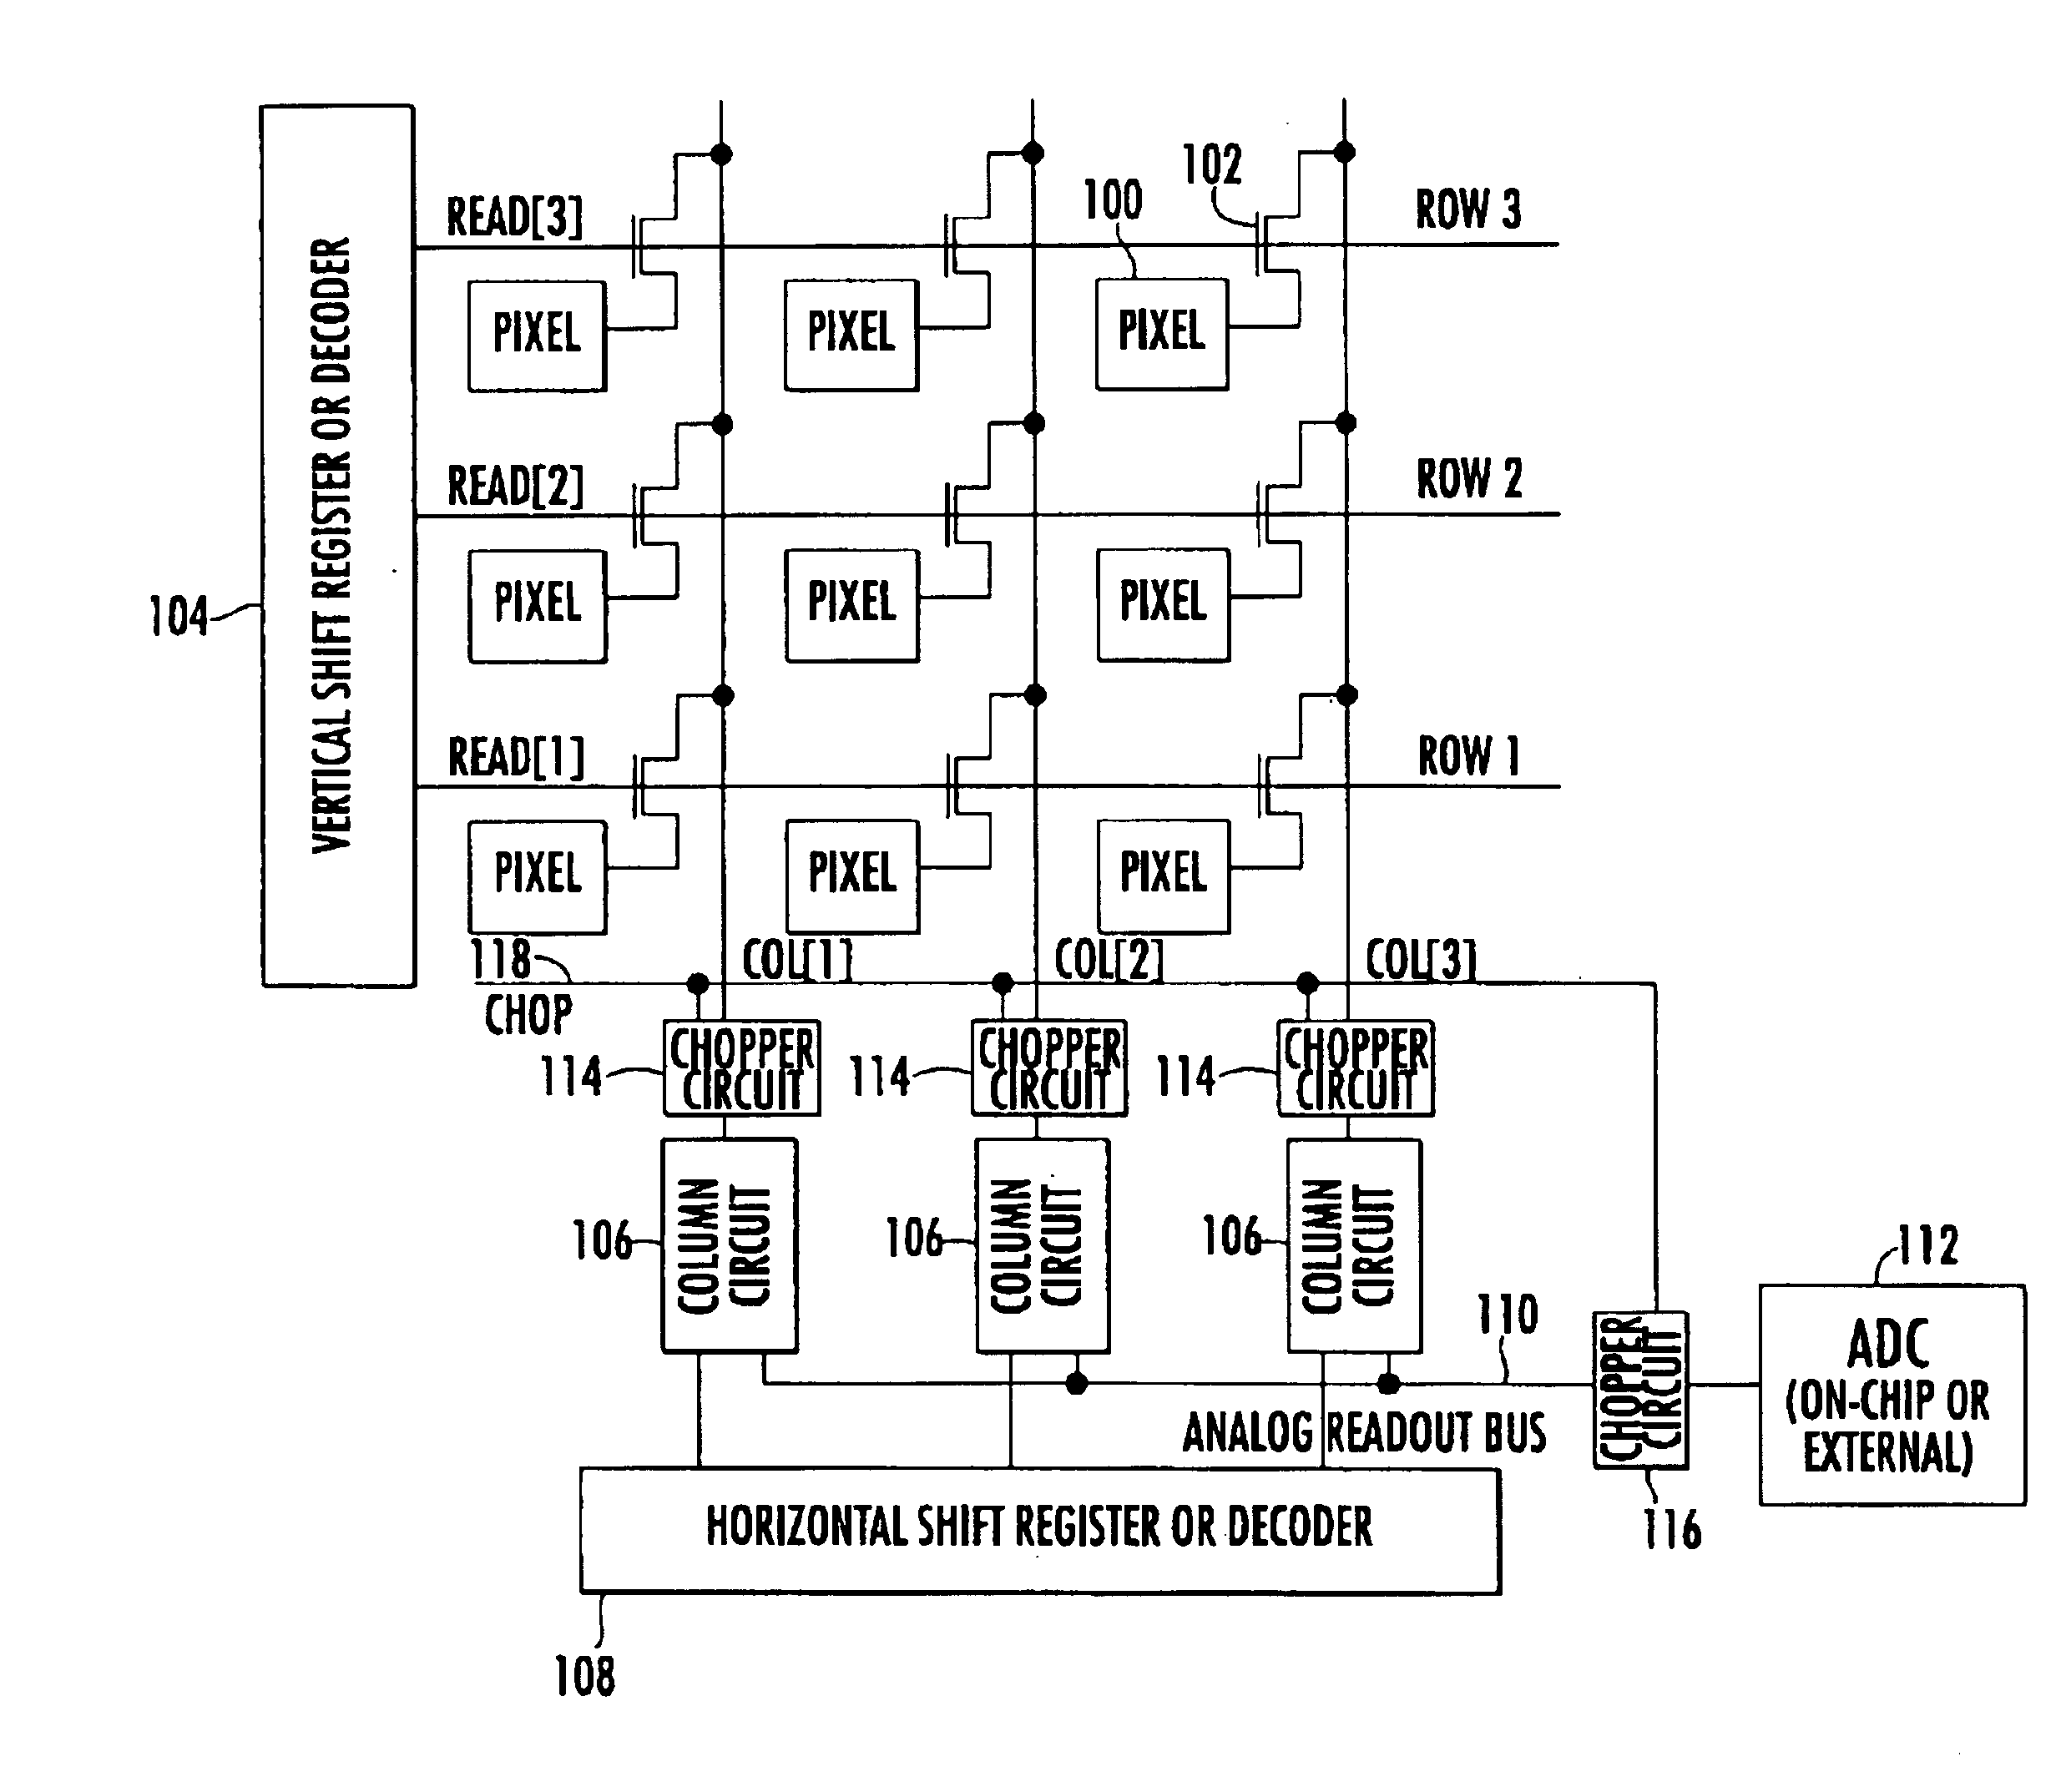 Modification of column fixed pattern column noise in solid state image sensors